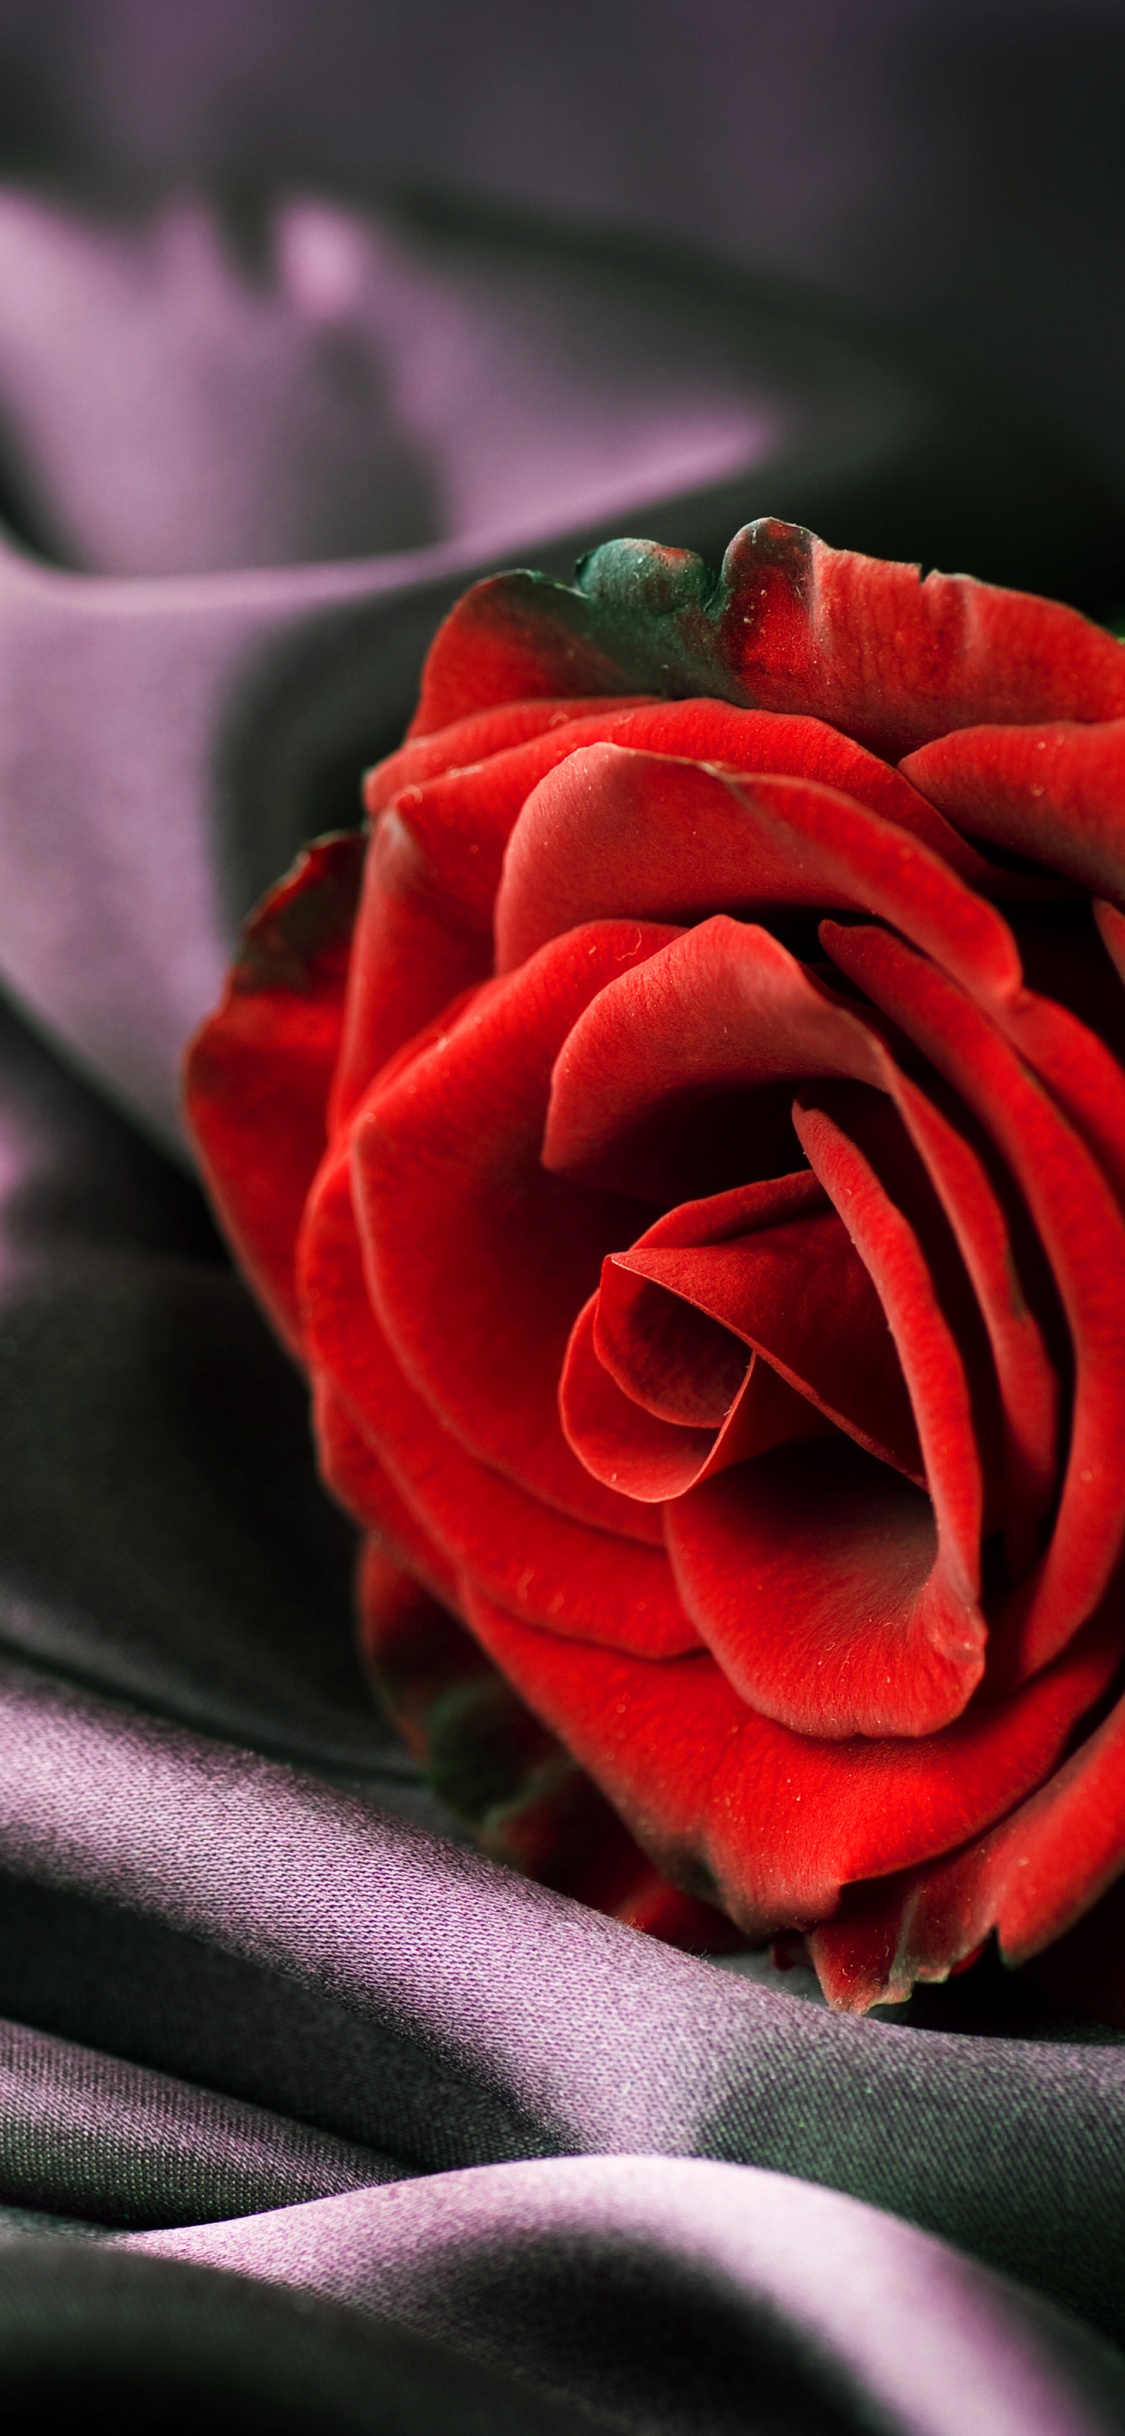 Red Rose on Gray Textile. Wallpaper in 1125x2436 Resolution